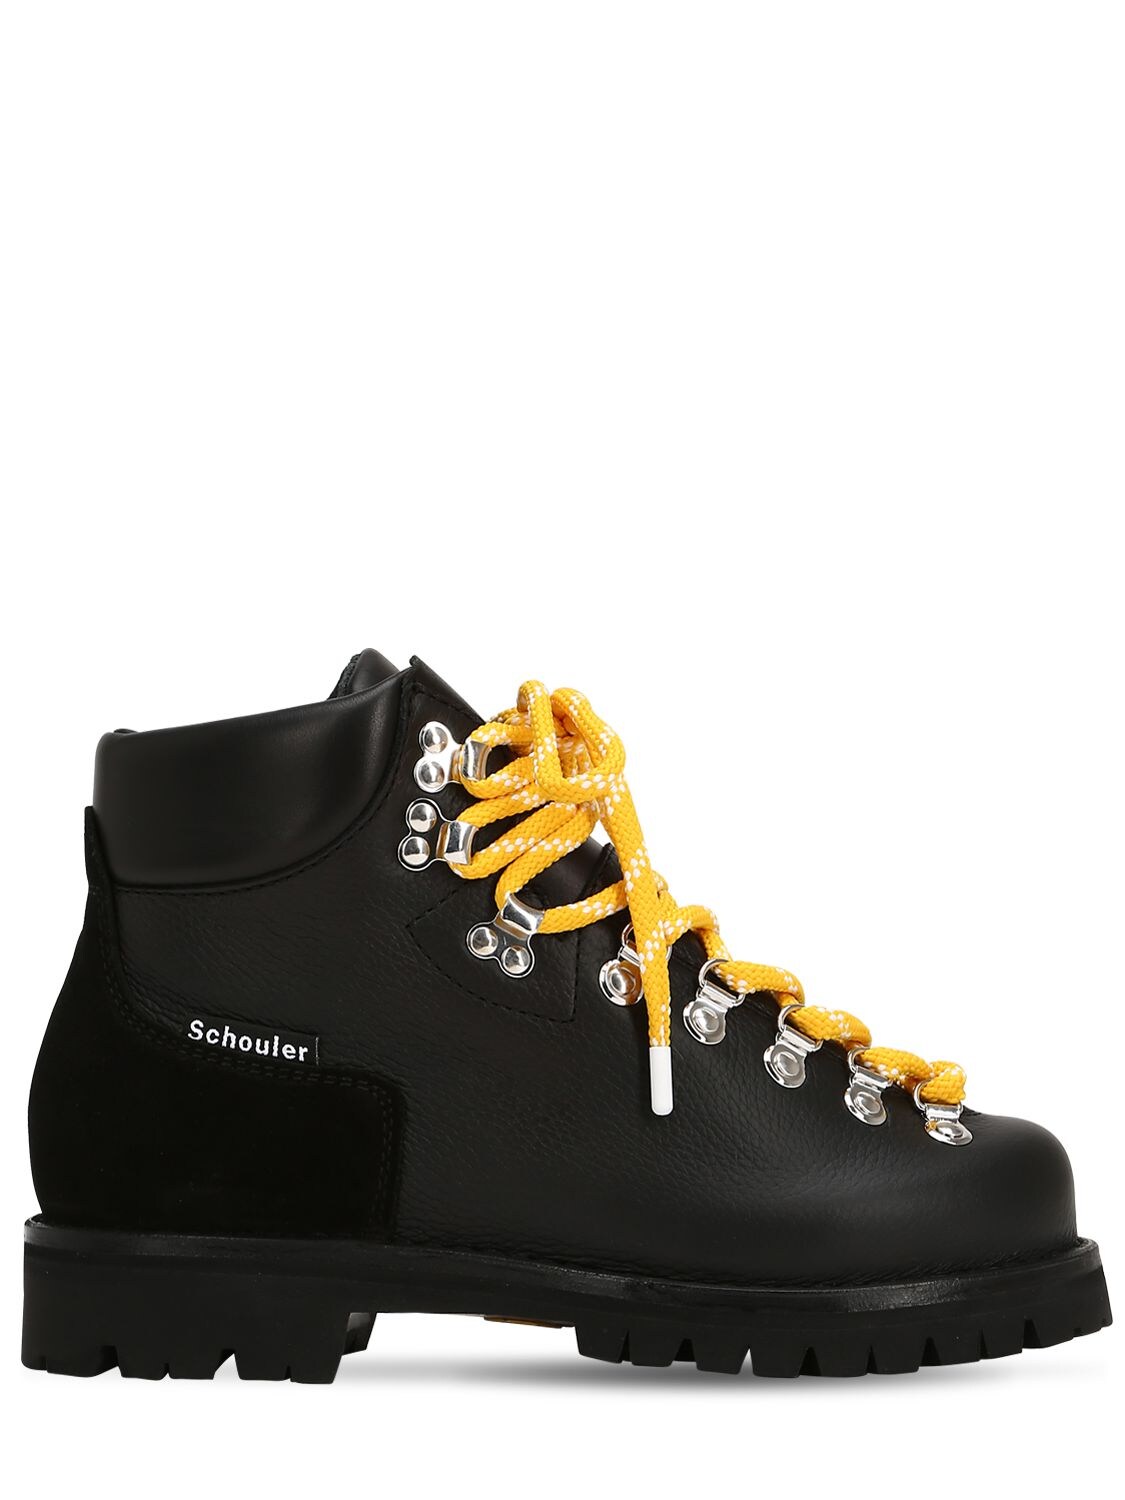 Proenza Schouler 30mm Leather Hiking Boots In Black